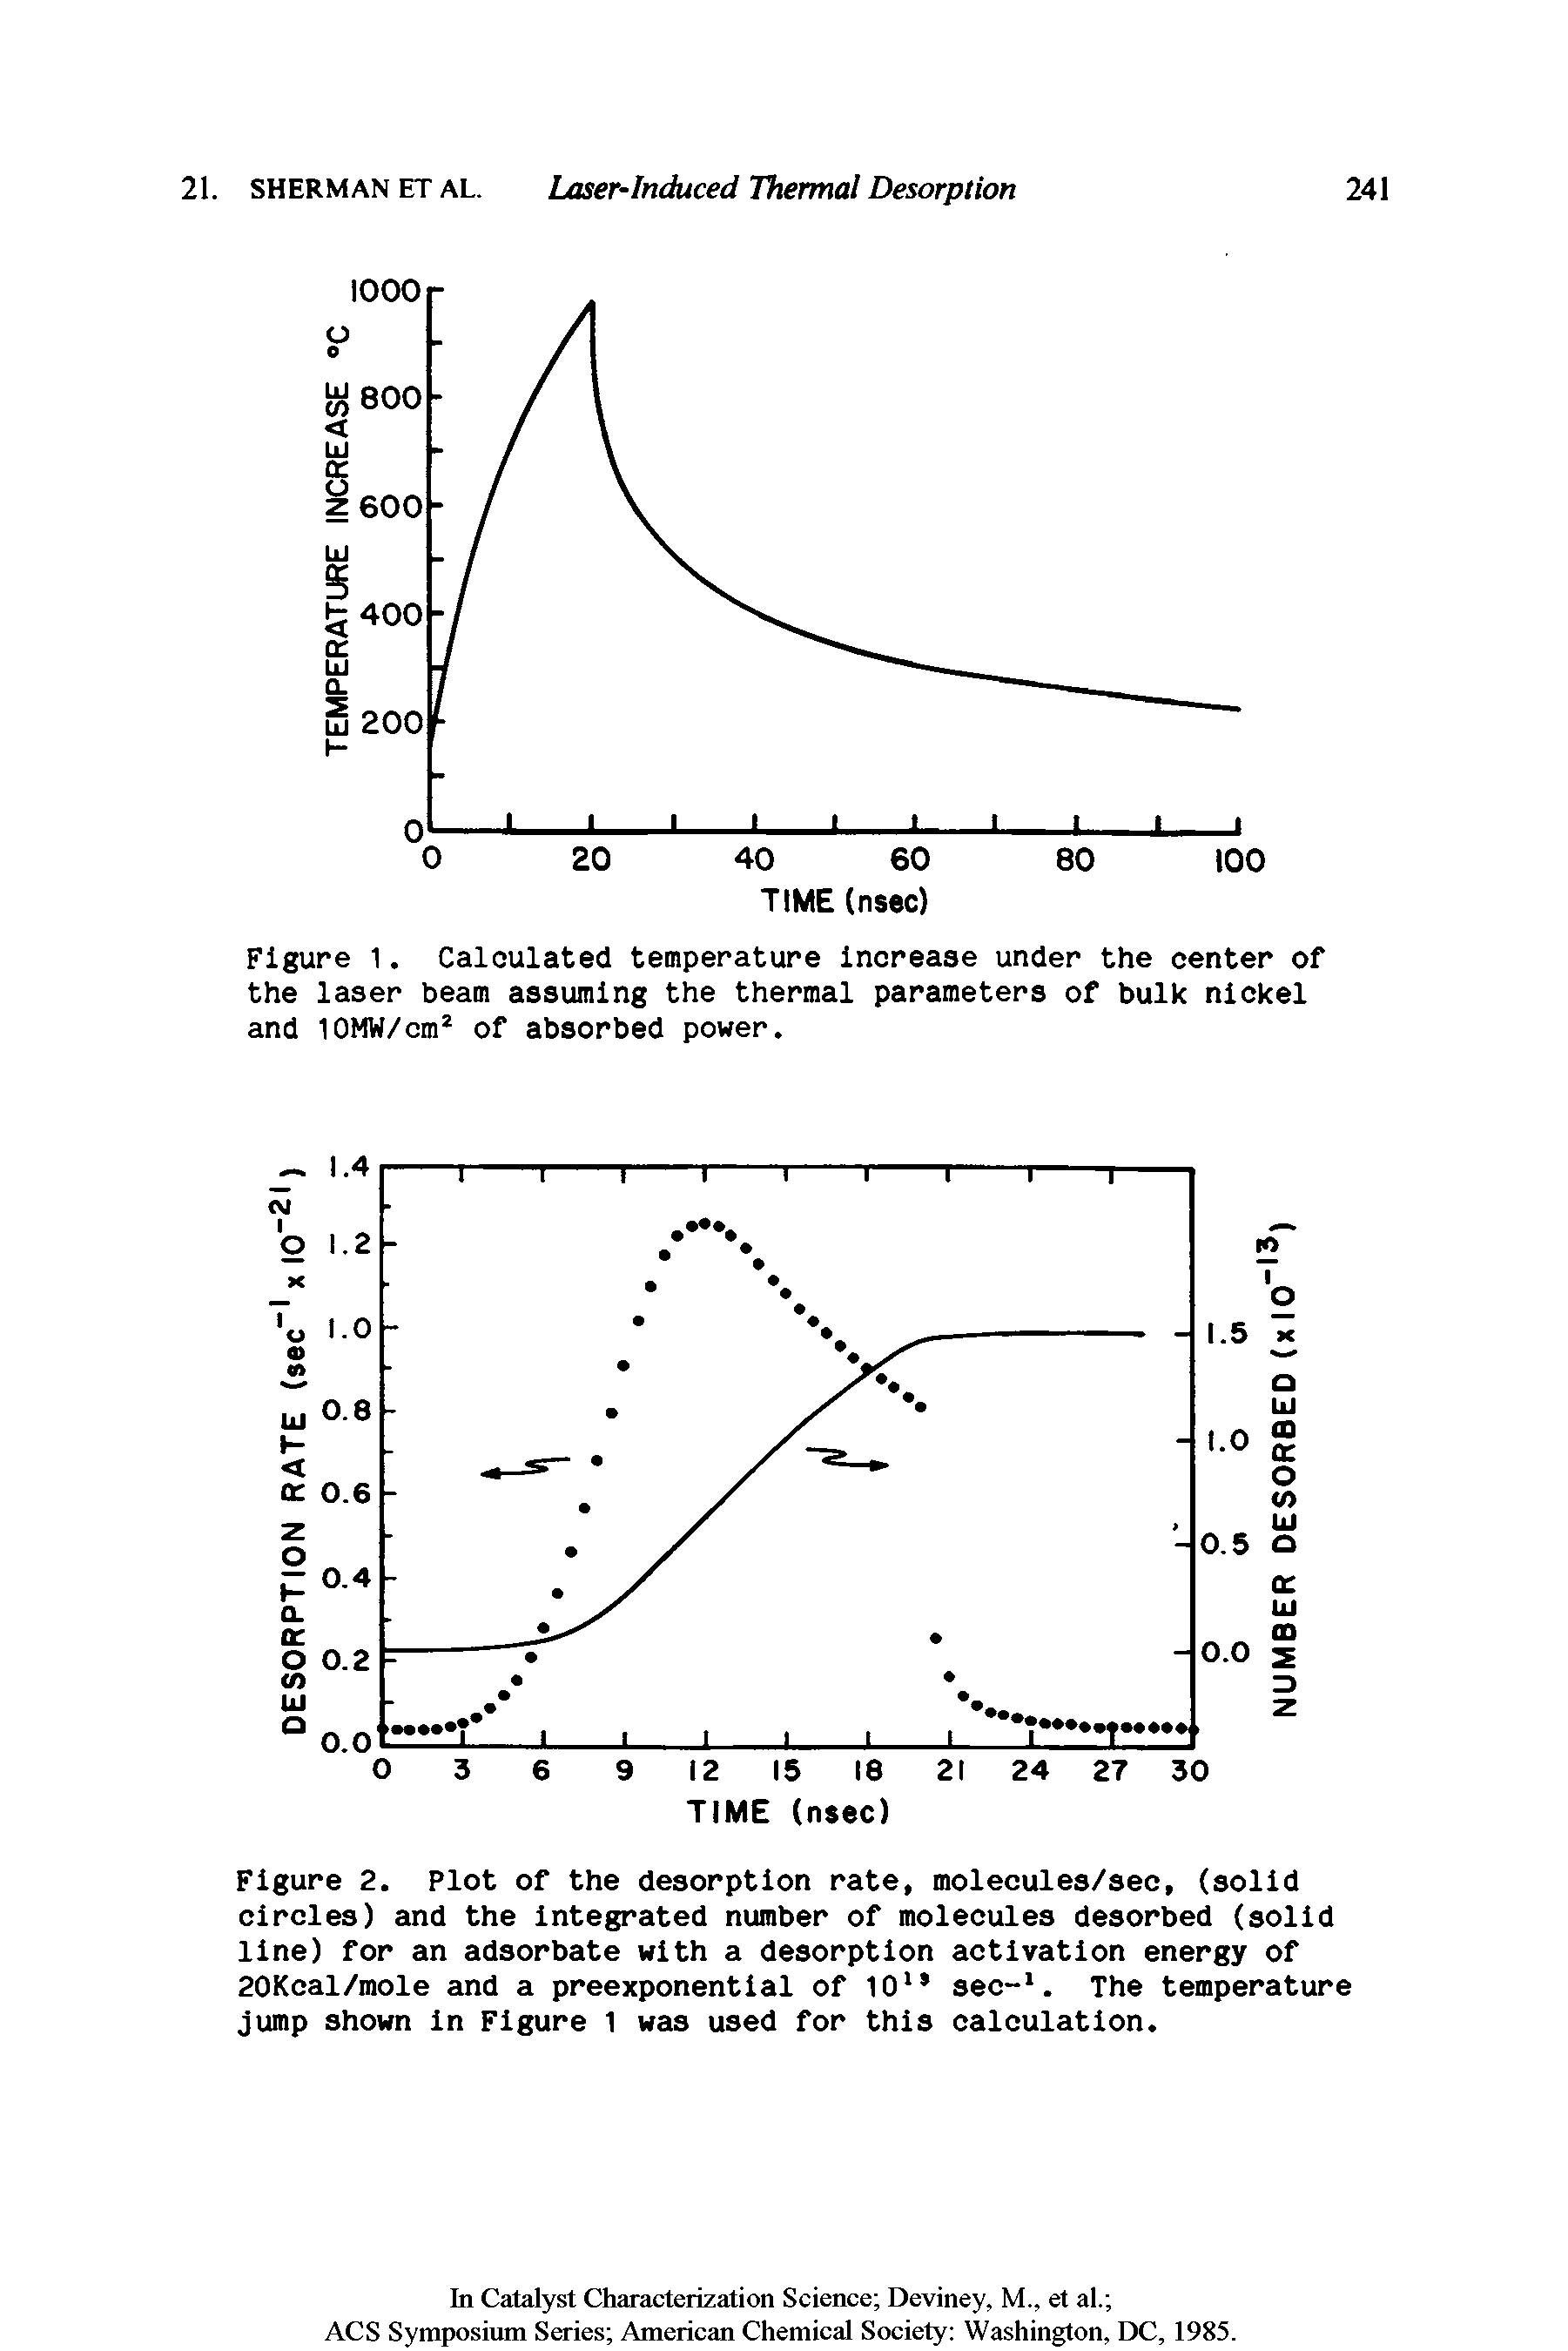 Figure 1. Calculated temperature Increase under the center of the laser beam assuming the thermal parameters of bulk nickel and lOMW/cm of absorbed power.